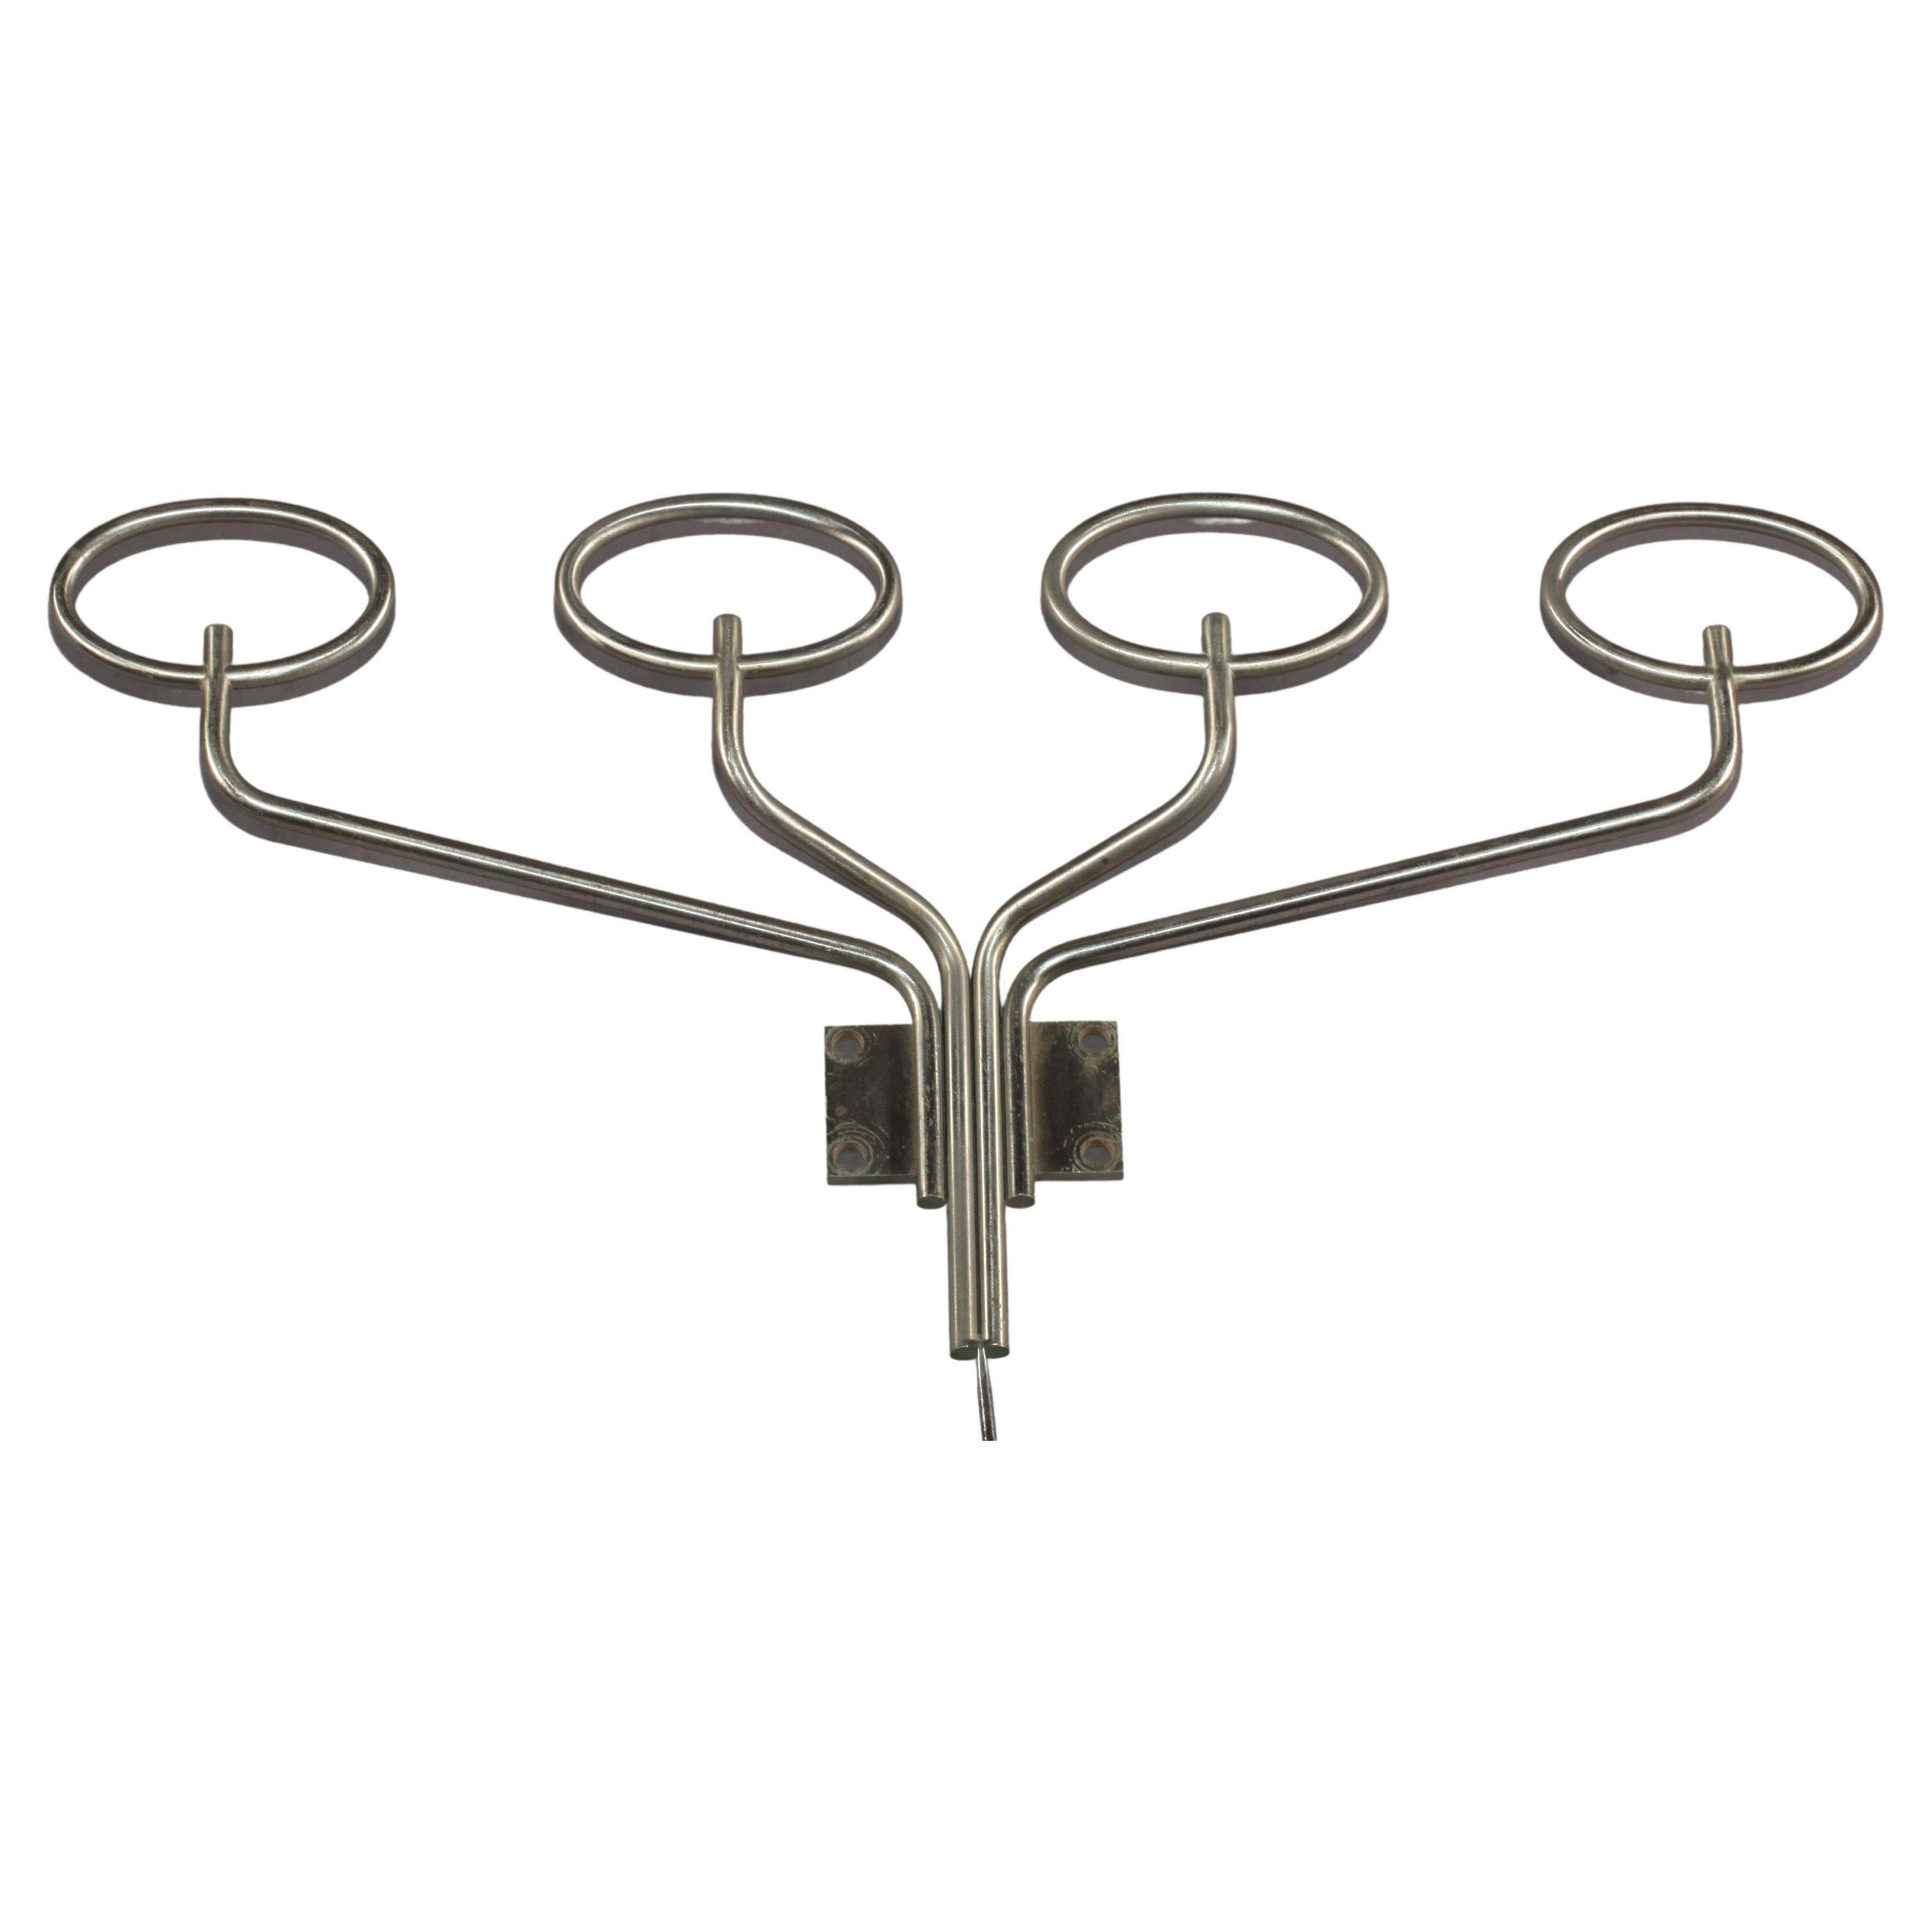 Italian mid-century Clitoquattro wall coat by Graminia and Mazza for Artemide, 1960s
Clitoquattro wall coat hooks composed of four oval-shaped hooks. The structure is in tubular nickel.
Produced by Artemide in 1960s and designed by Giuliana